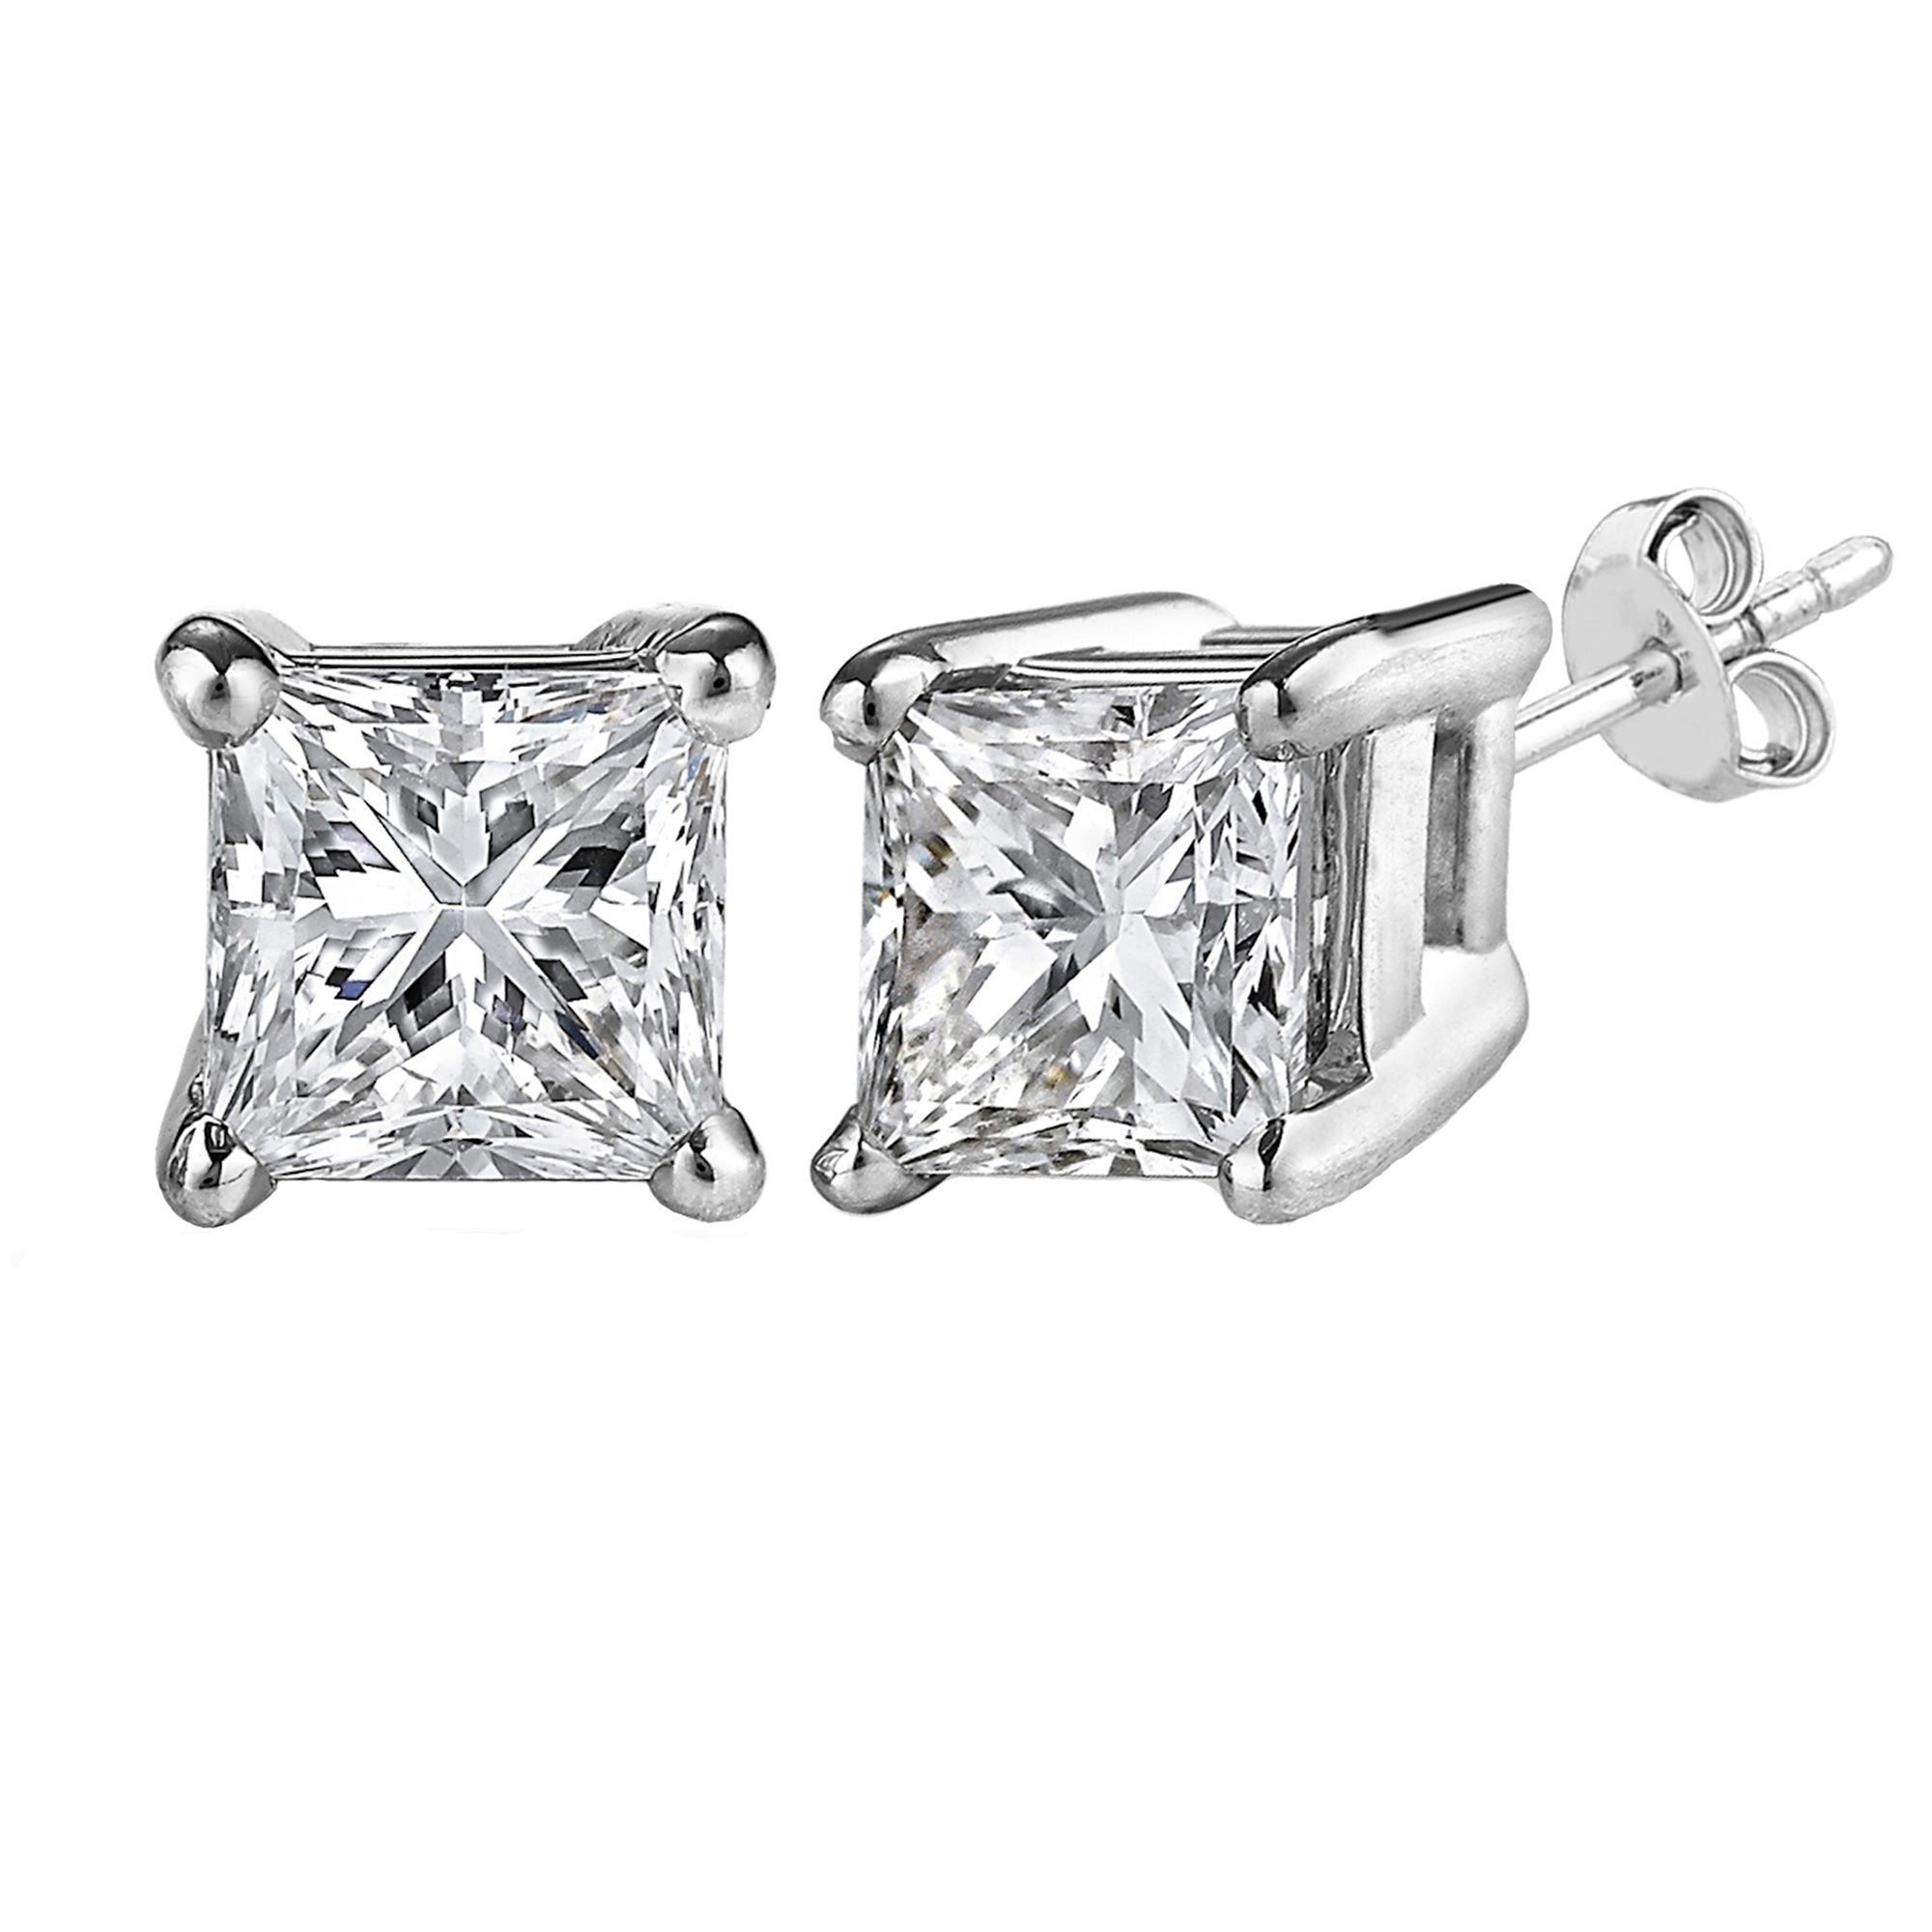 Sterling Silver Rhodium Finish Princess Cut Cubic Zirconia Stud Earring fine designer jewelry for men and women